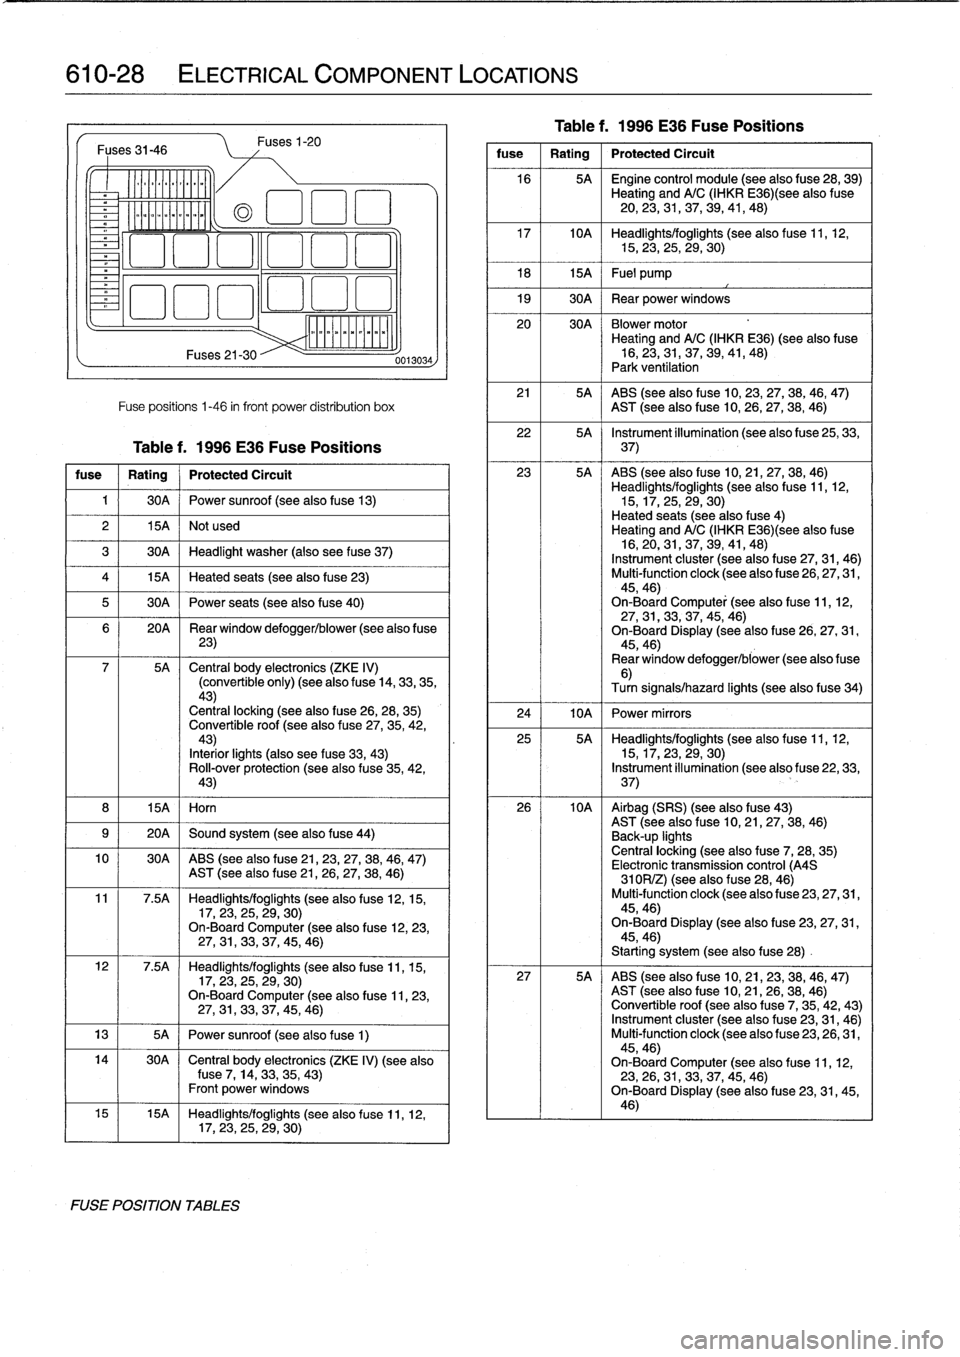 BMW 318i 1997 E36 Service Manual 
610-28

	

ELECTRICAL
COMPONENT
LOCATIONS

Fuses
31-46

k
Lírcoo)]
LE

7a
Maz

Fuses
21-30

Fuse
positions
1-46
in
front
power
distribution
box
Table
f
.
1996
E36
Fuse
Positions

fuse

	

Rating

	
